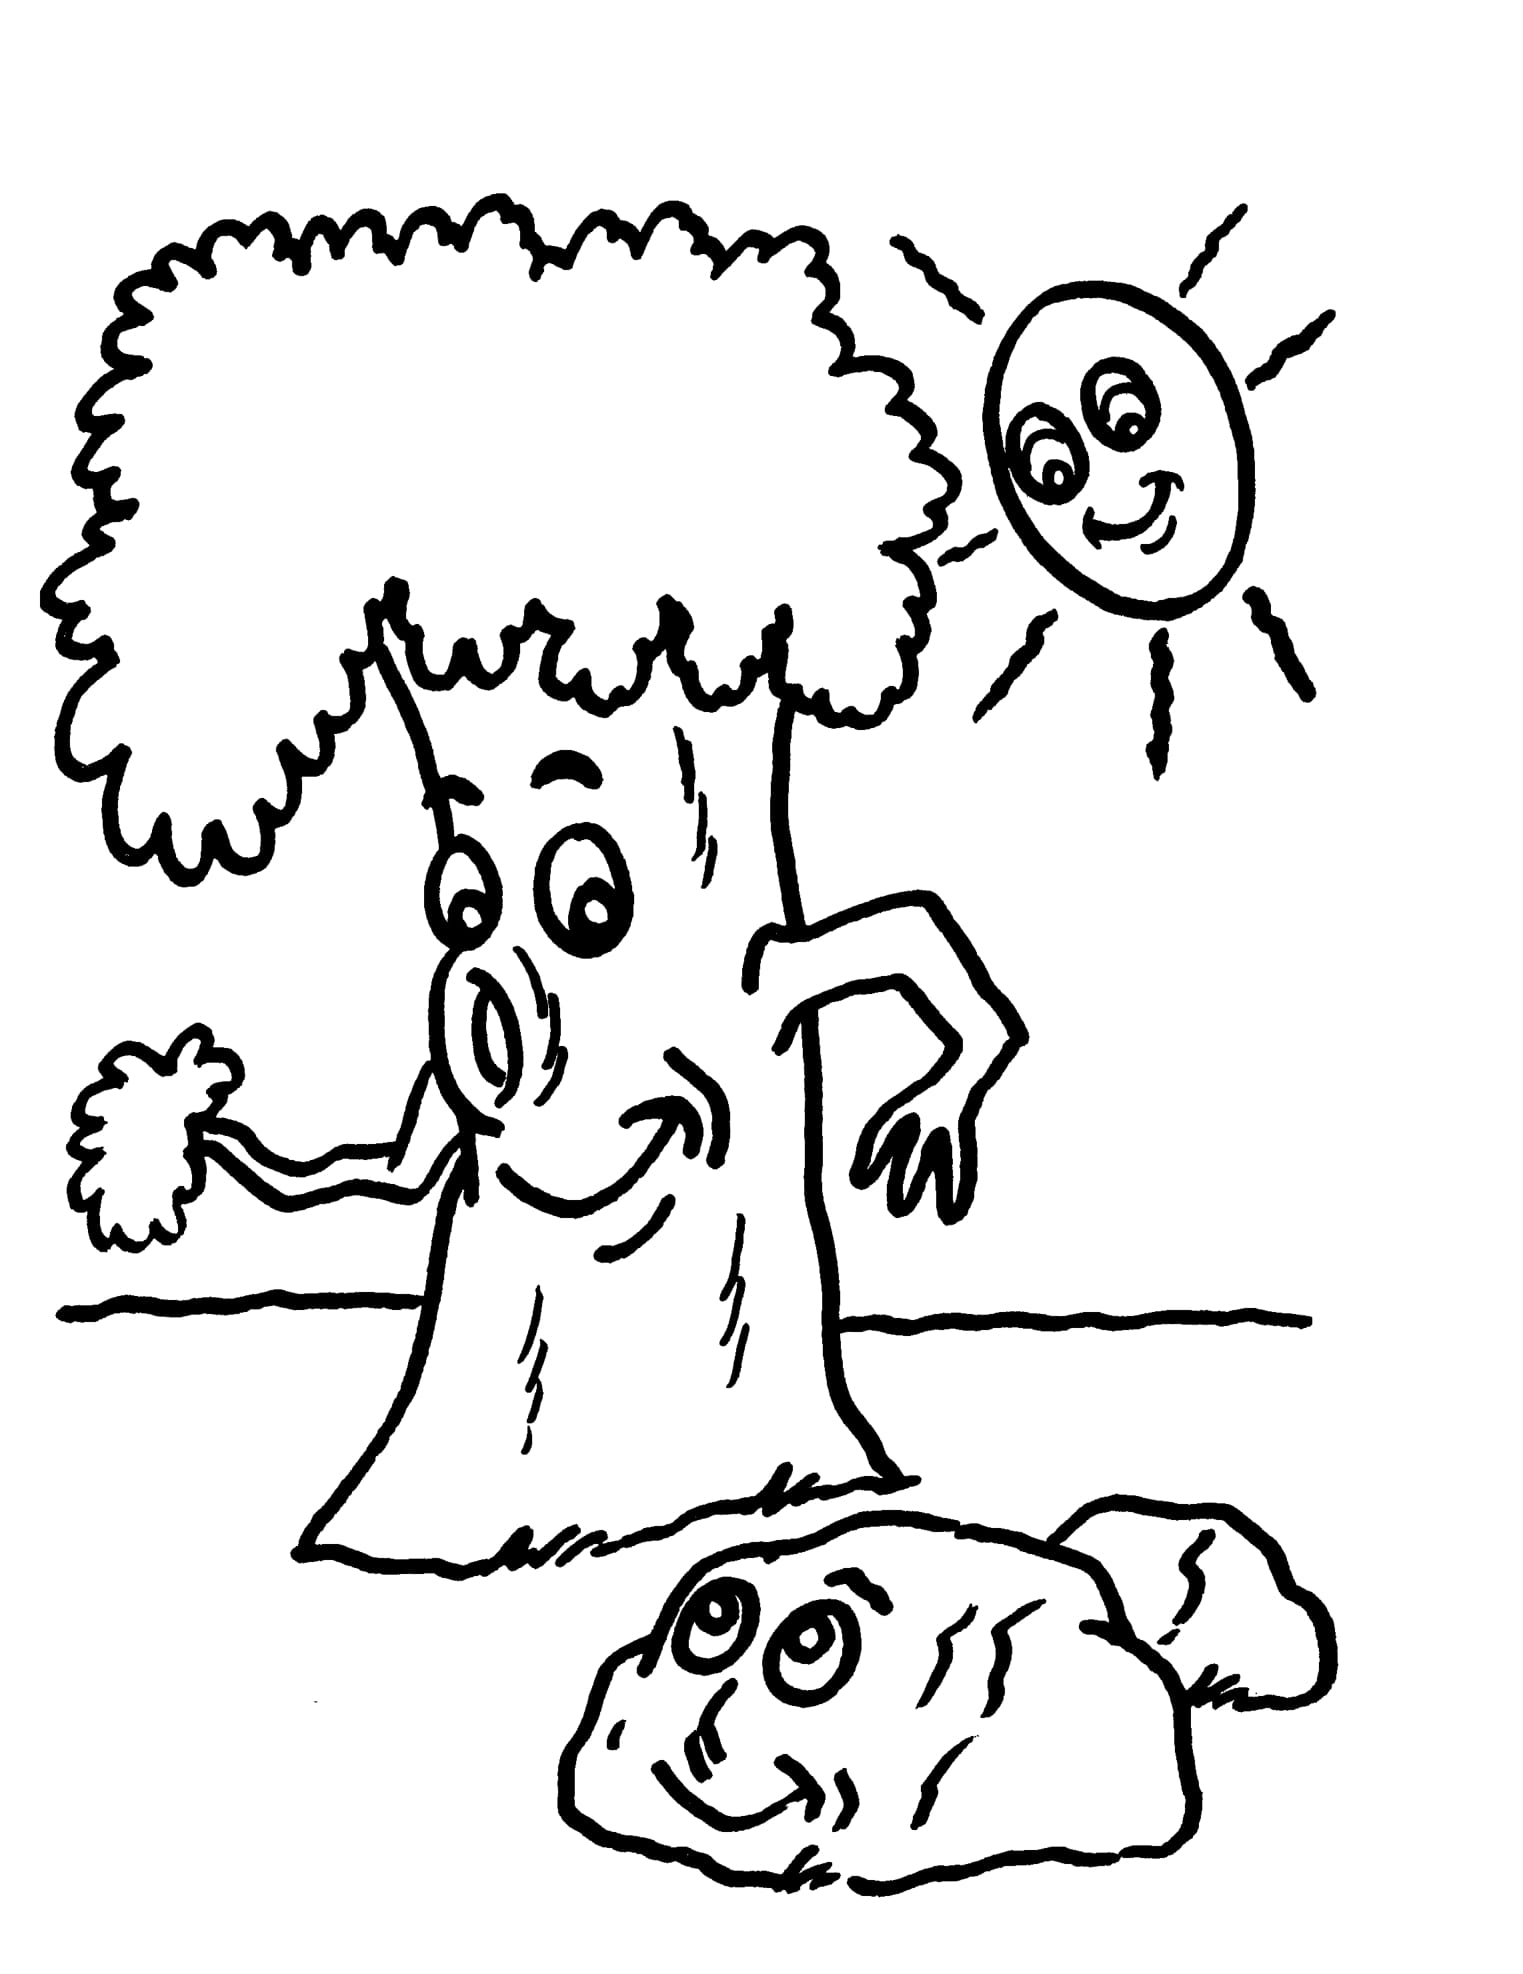 Coloring Pages : Easy Animals Coloring Plus Of Tree First Copy ...